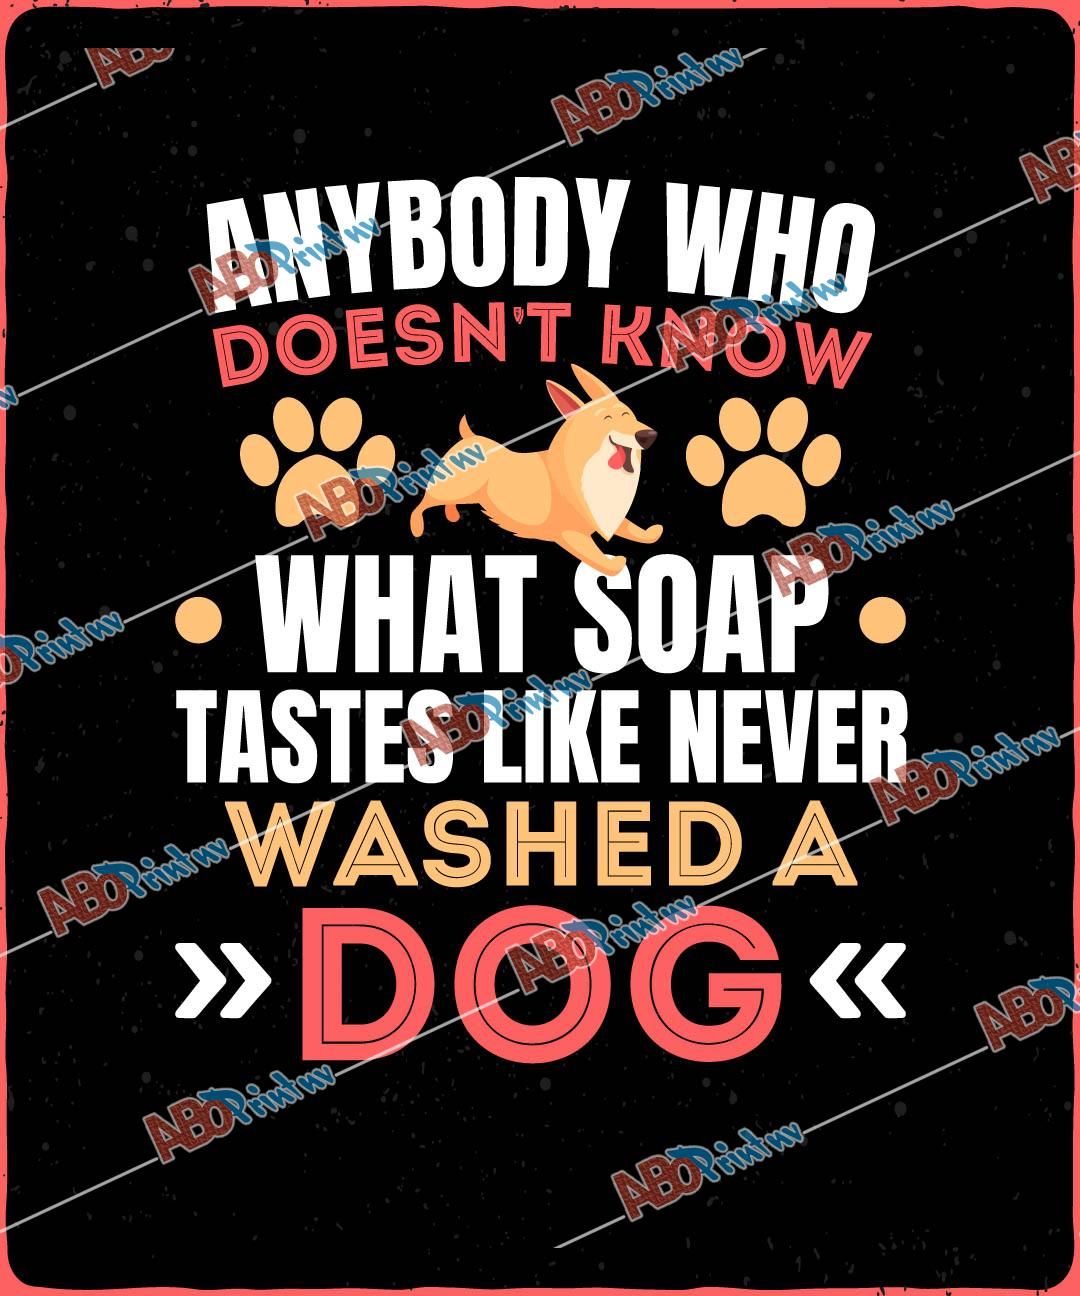 Anybody who doesn it know what soap tastes like never washed a dogJPG (1).jpg